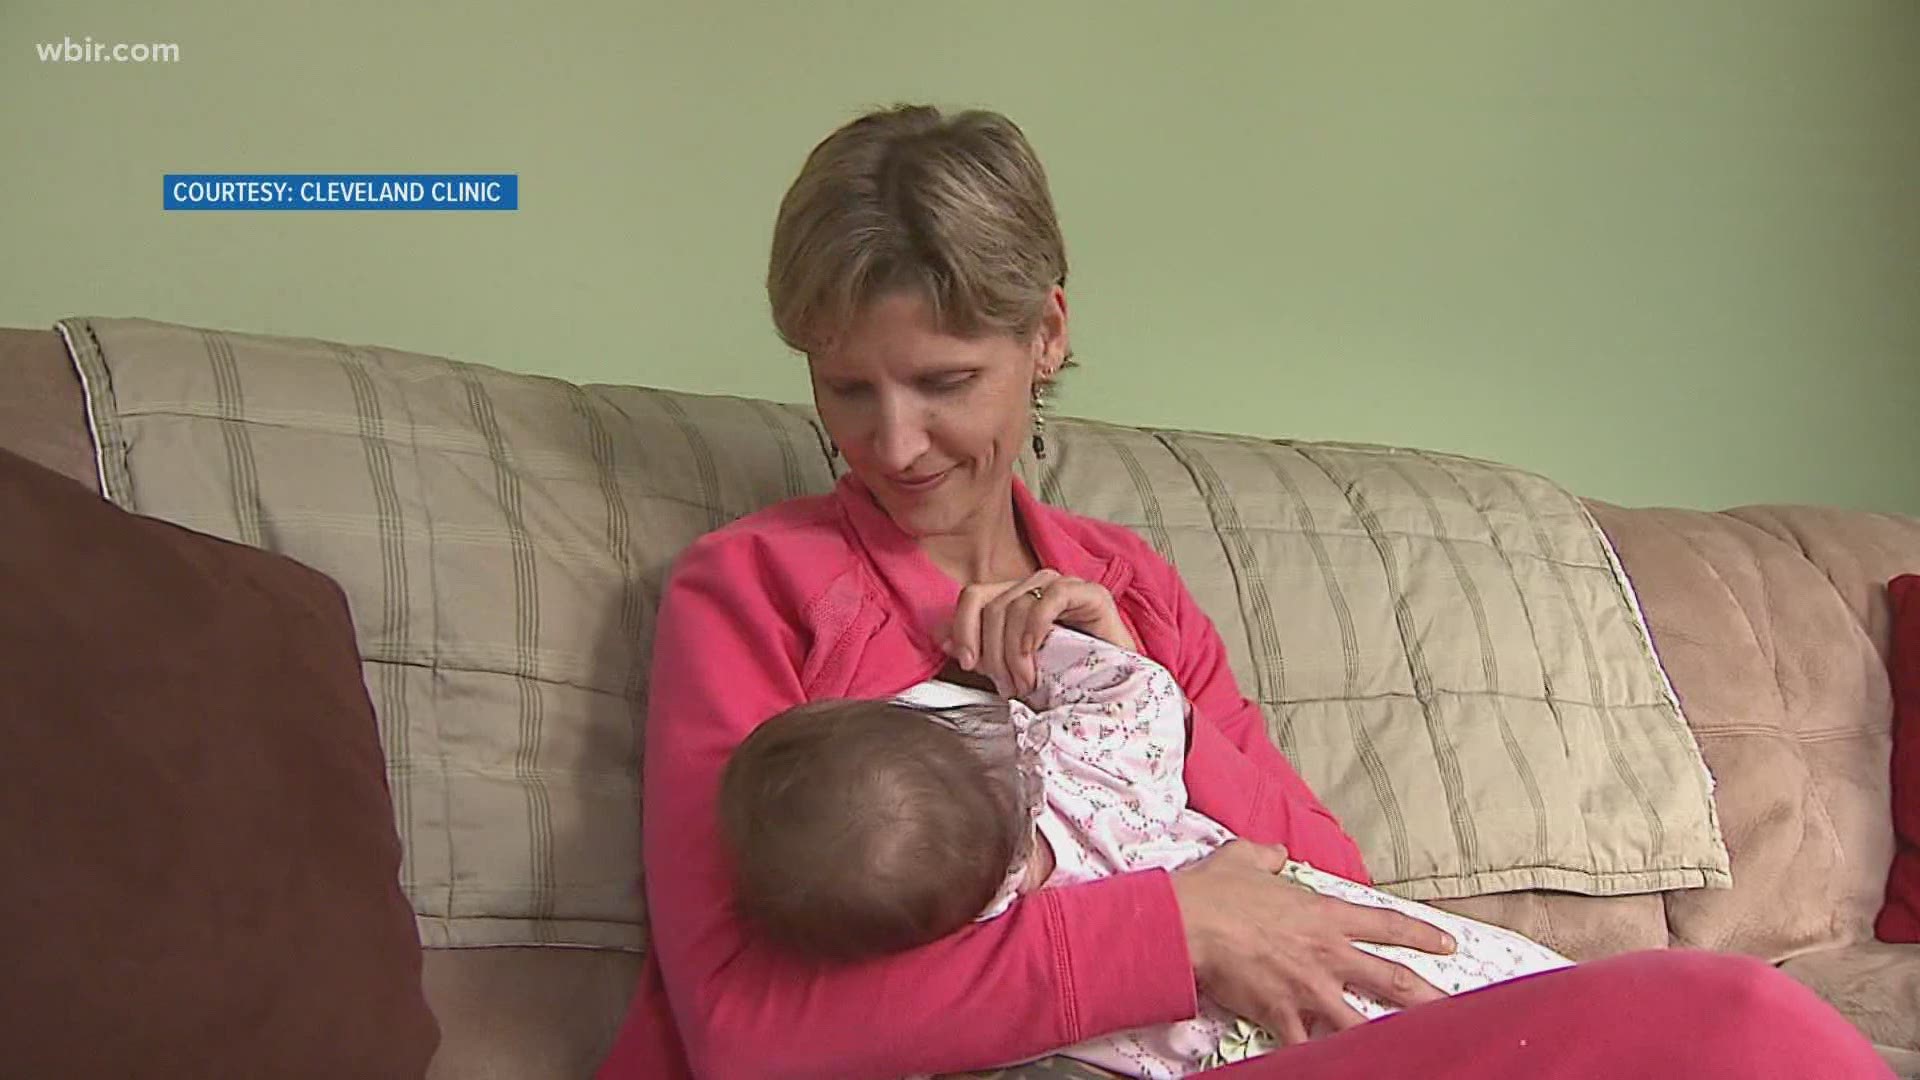 Helping families reach AAP breastfeeding recommendations | wcnc.com